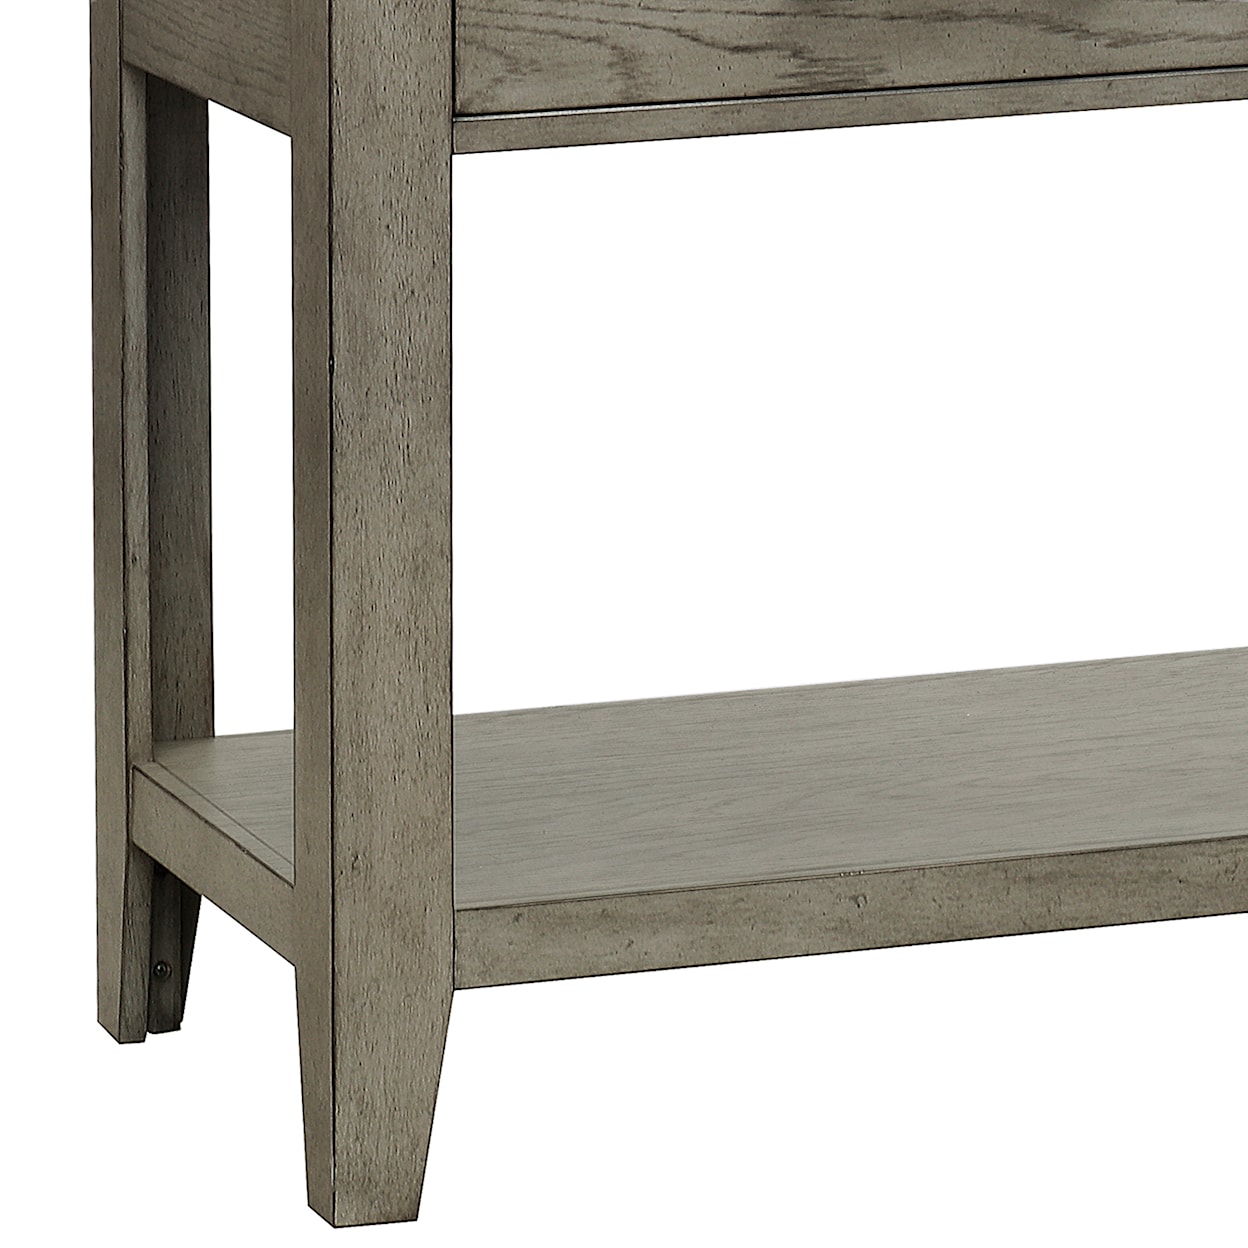 Samuel Lawrence Essex by Drew and Jonathan Home Essex Sofa Table